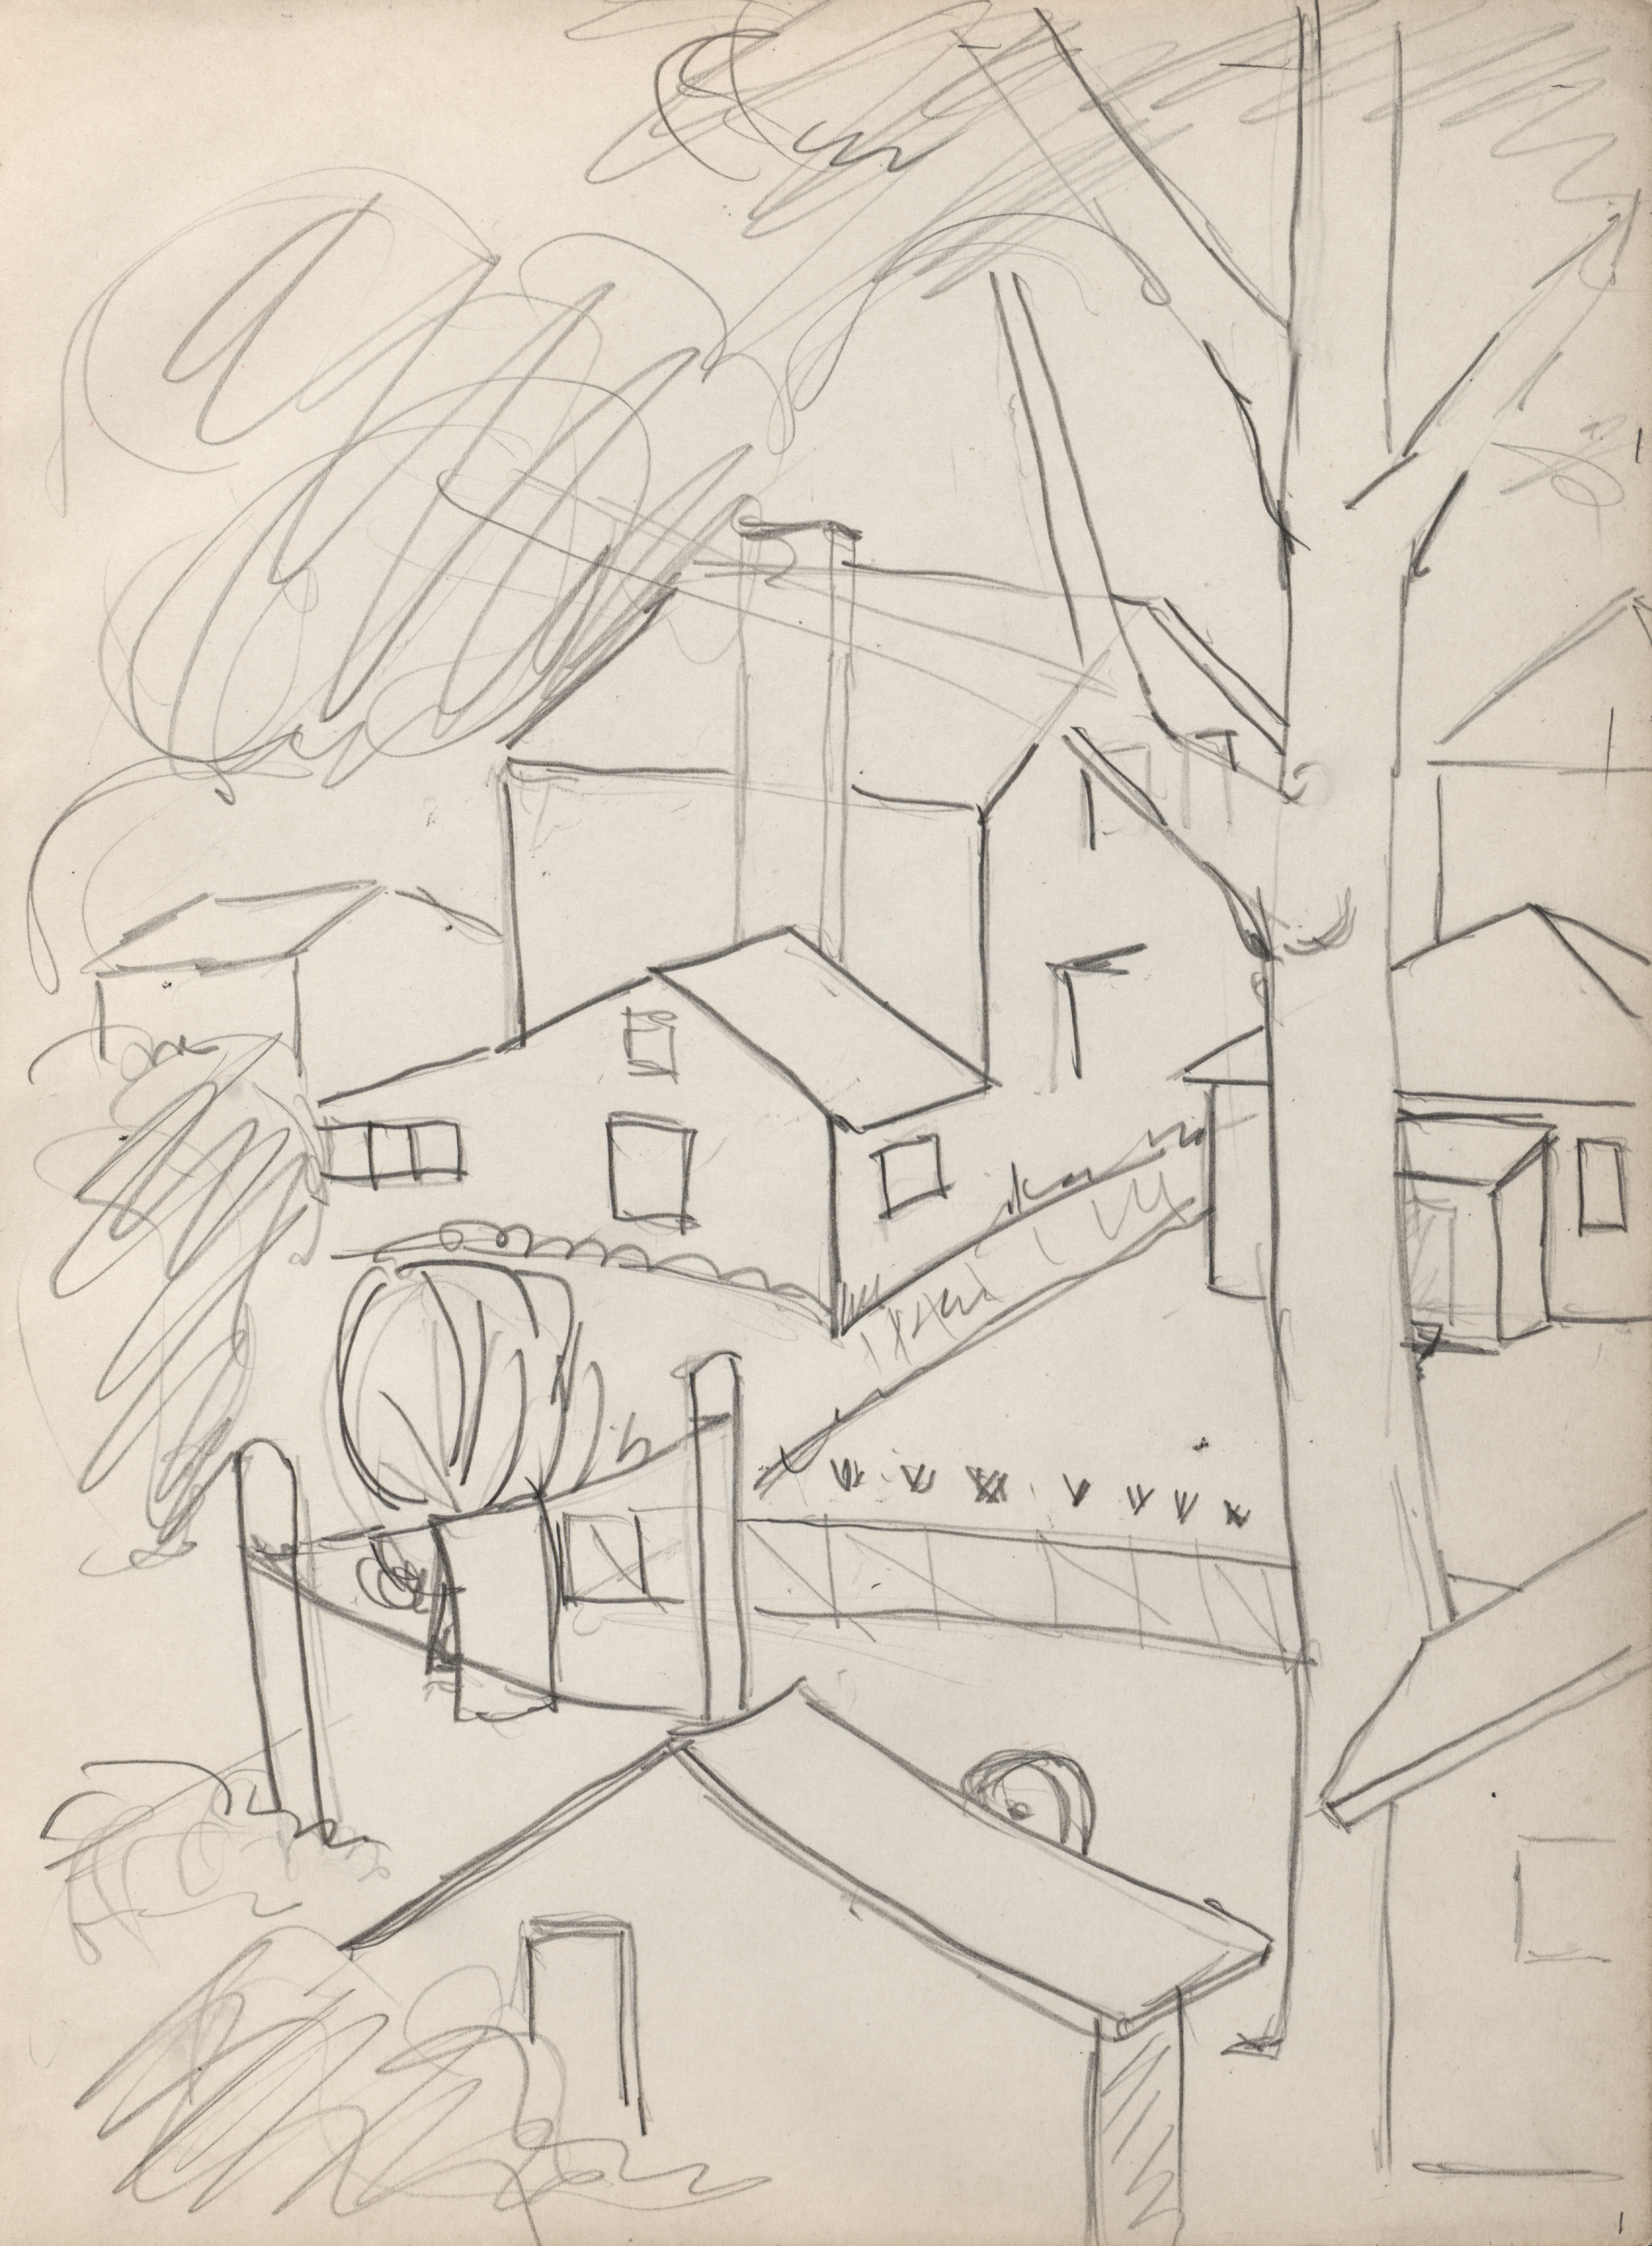 Sketchbook No. 2, page 1: Houses and Gardens